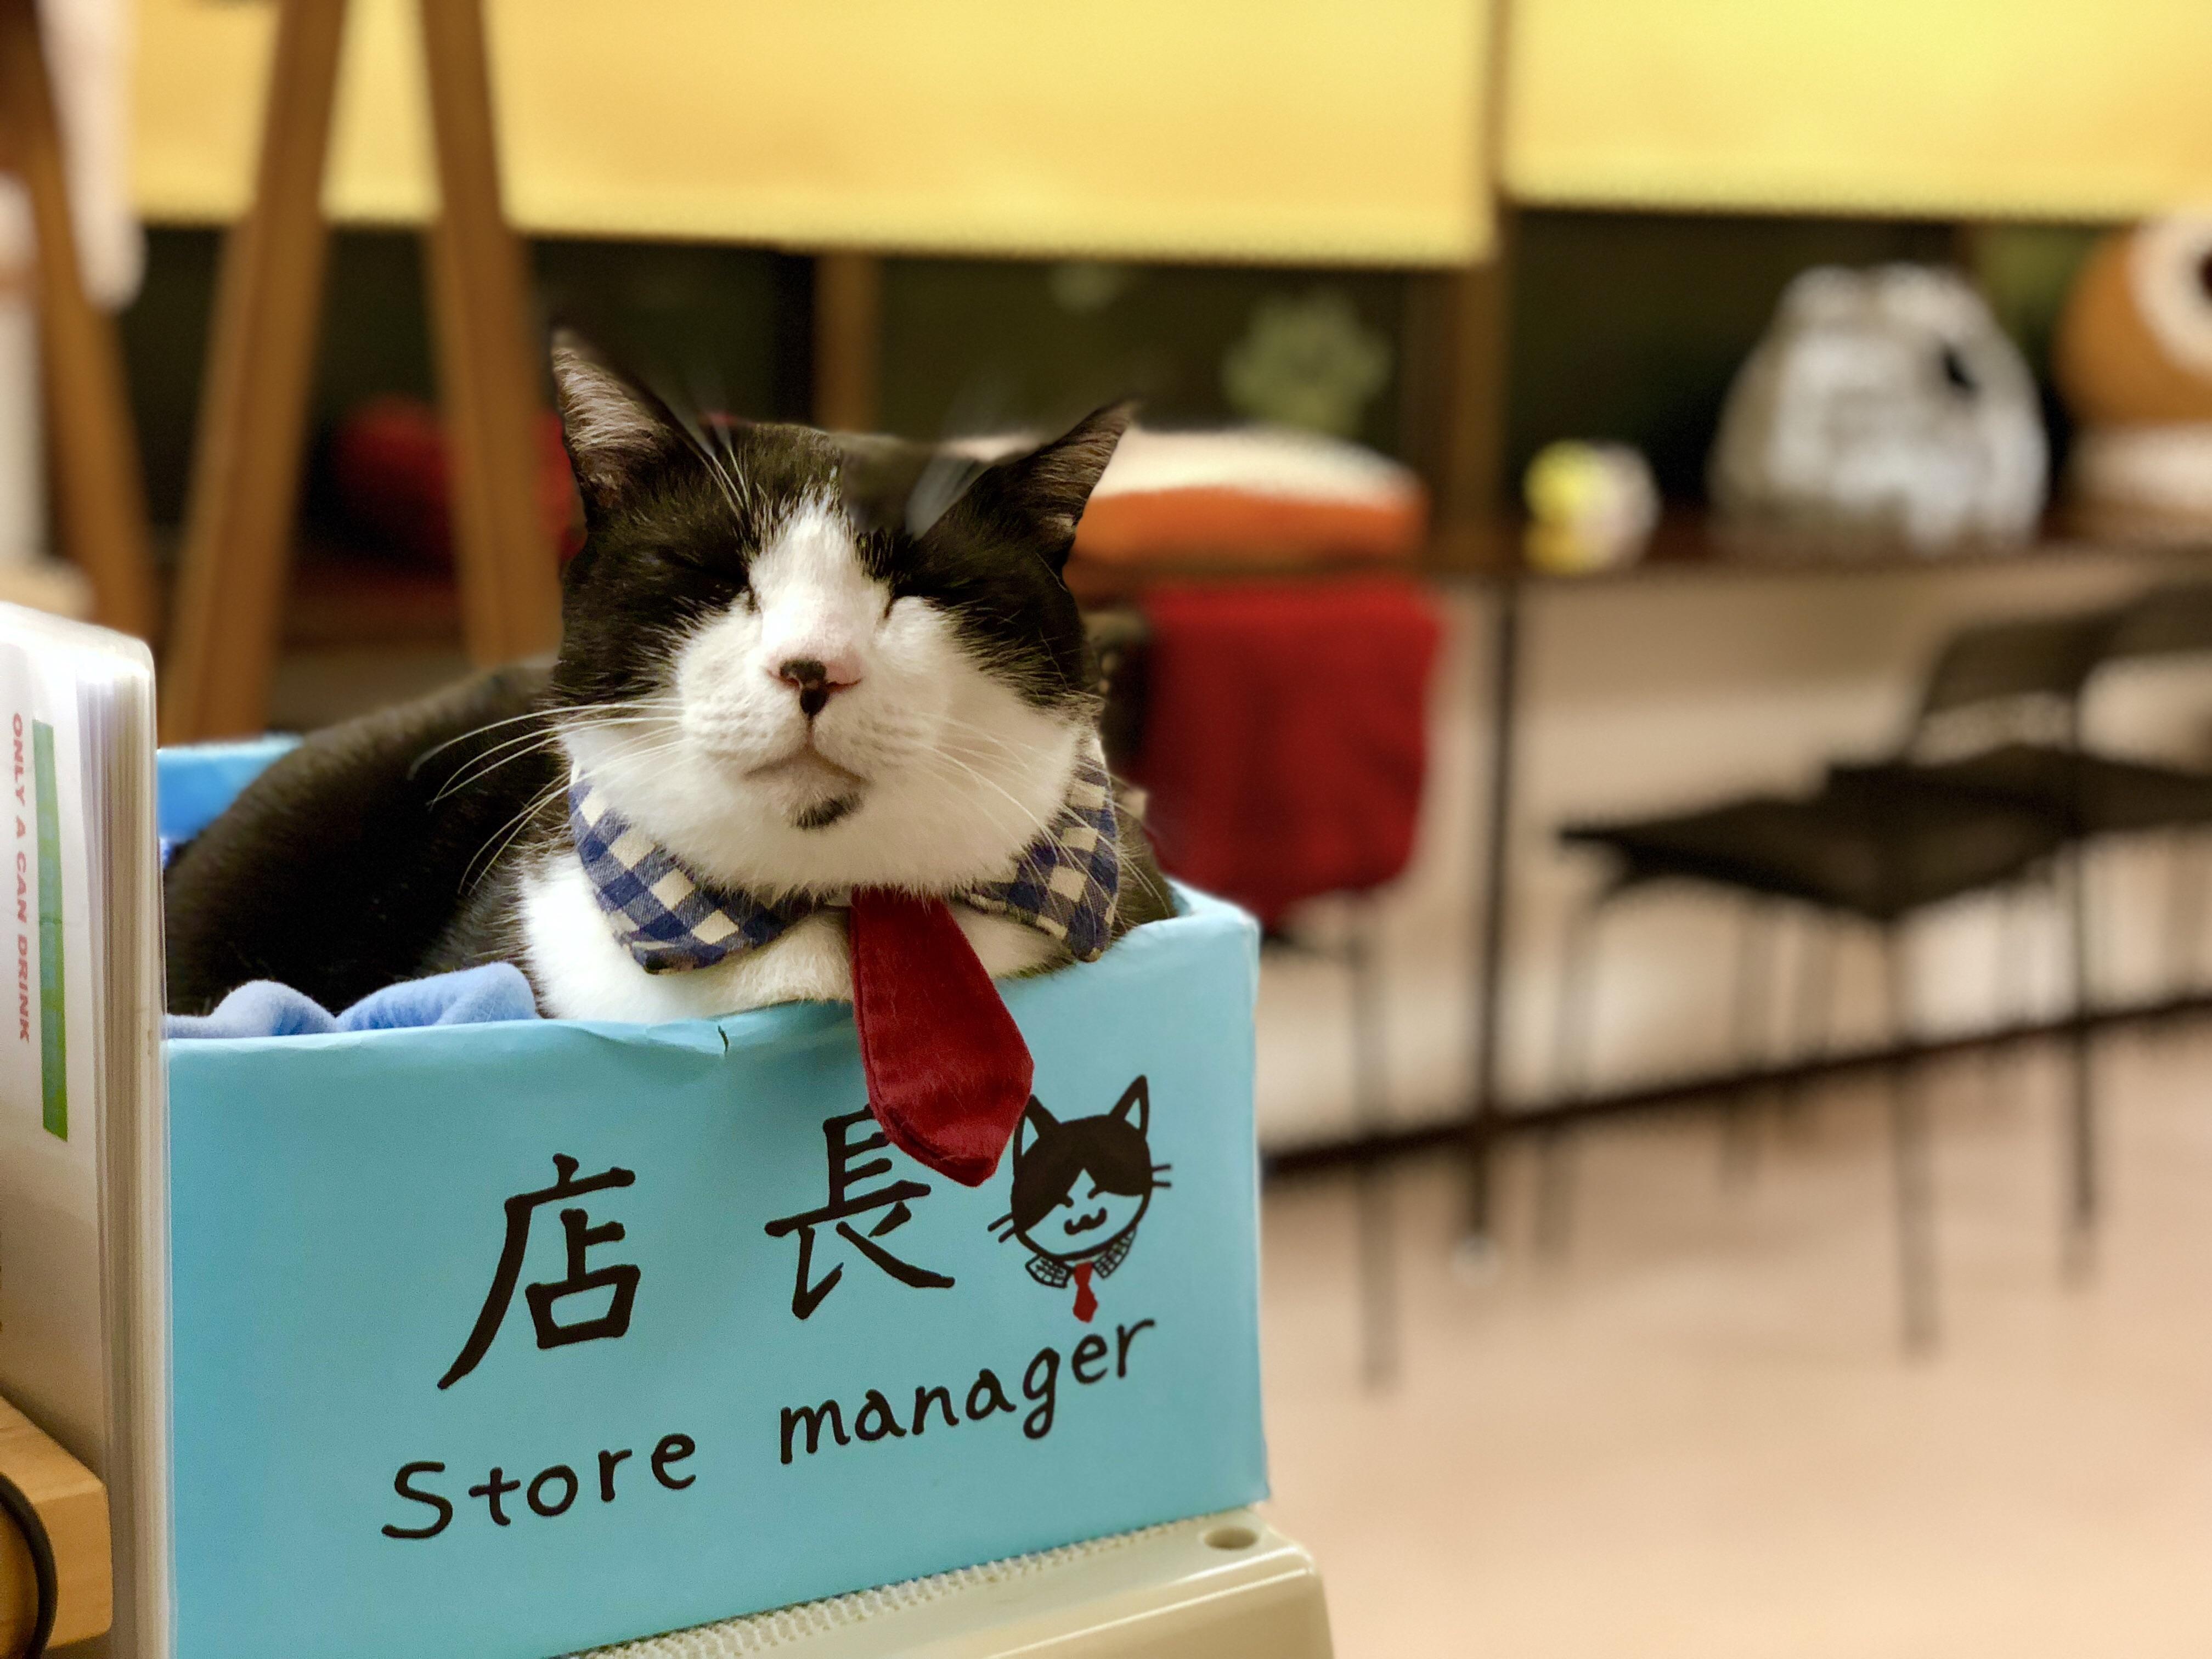 Cat cafe in Kyoto. His name is Bob.